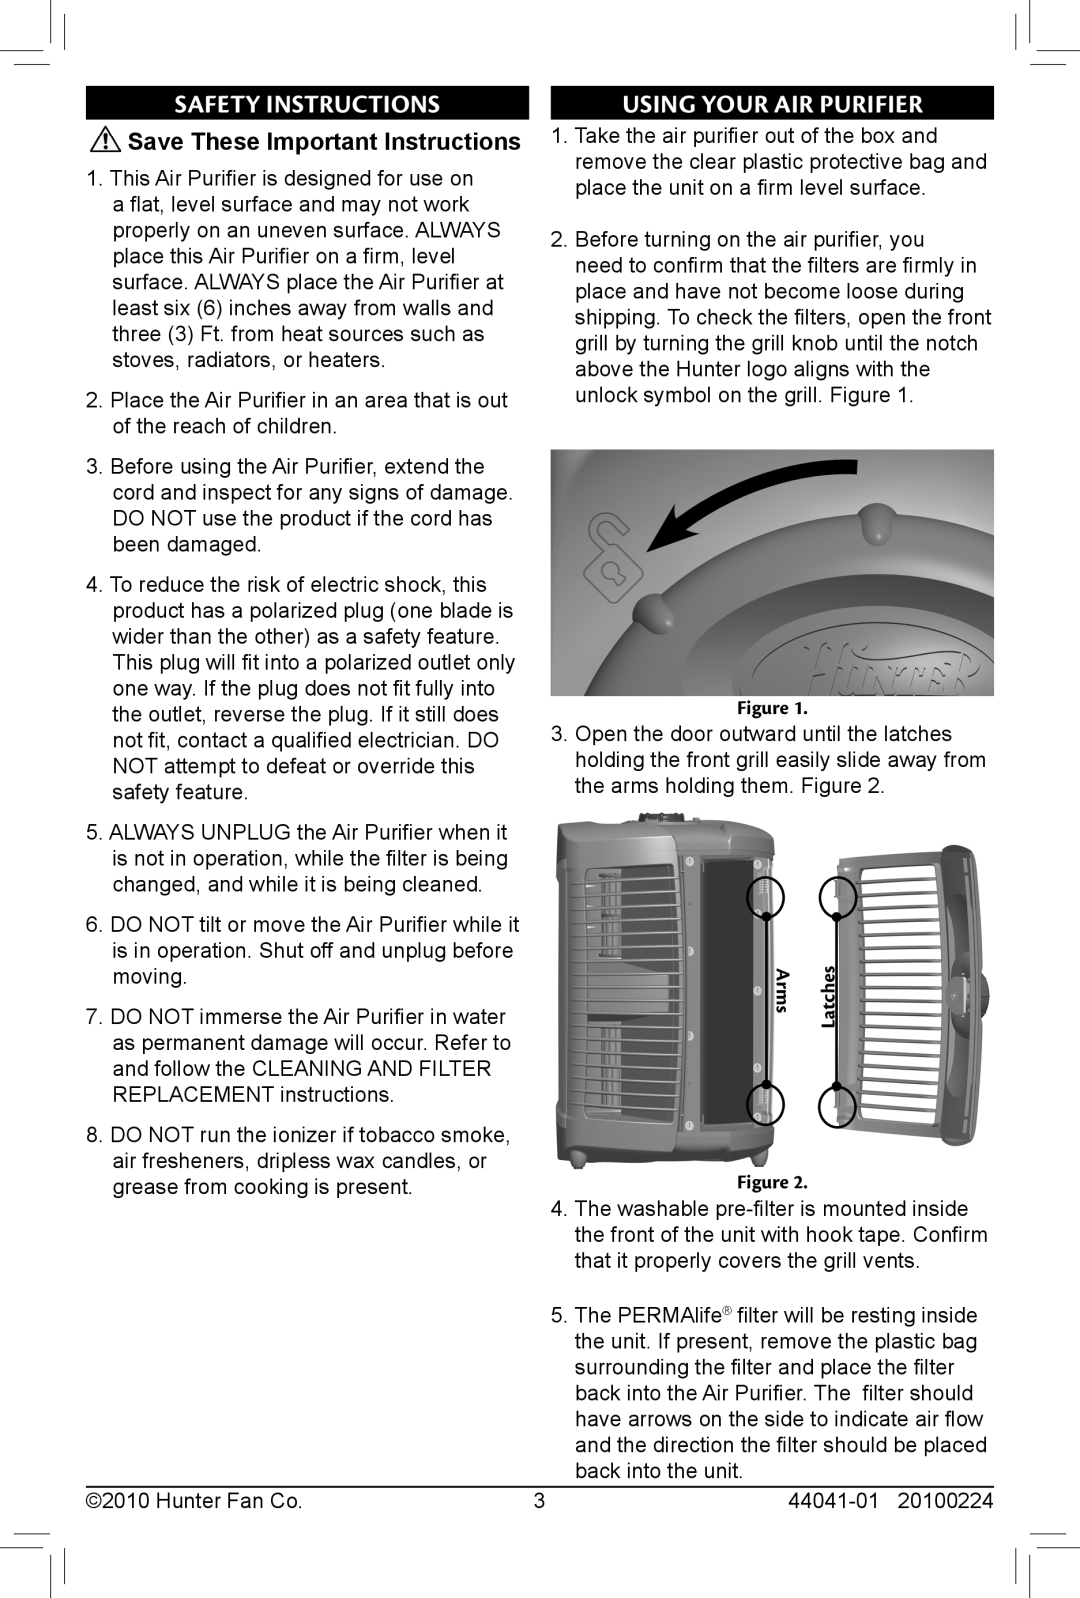 Hunter Fan 30707, 44041-01, 20100224 Safety Instructions, Using Your Air Purifier, Save These Important Instructions 